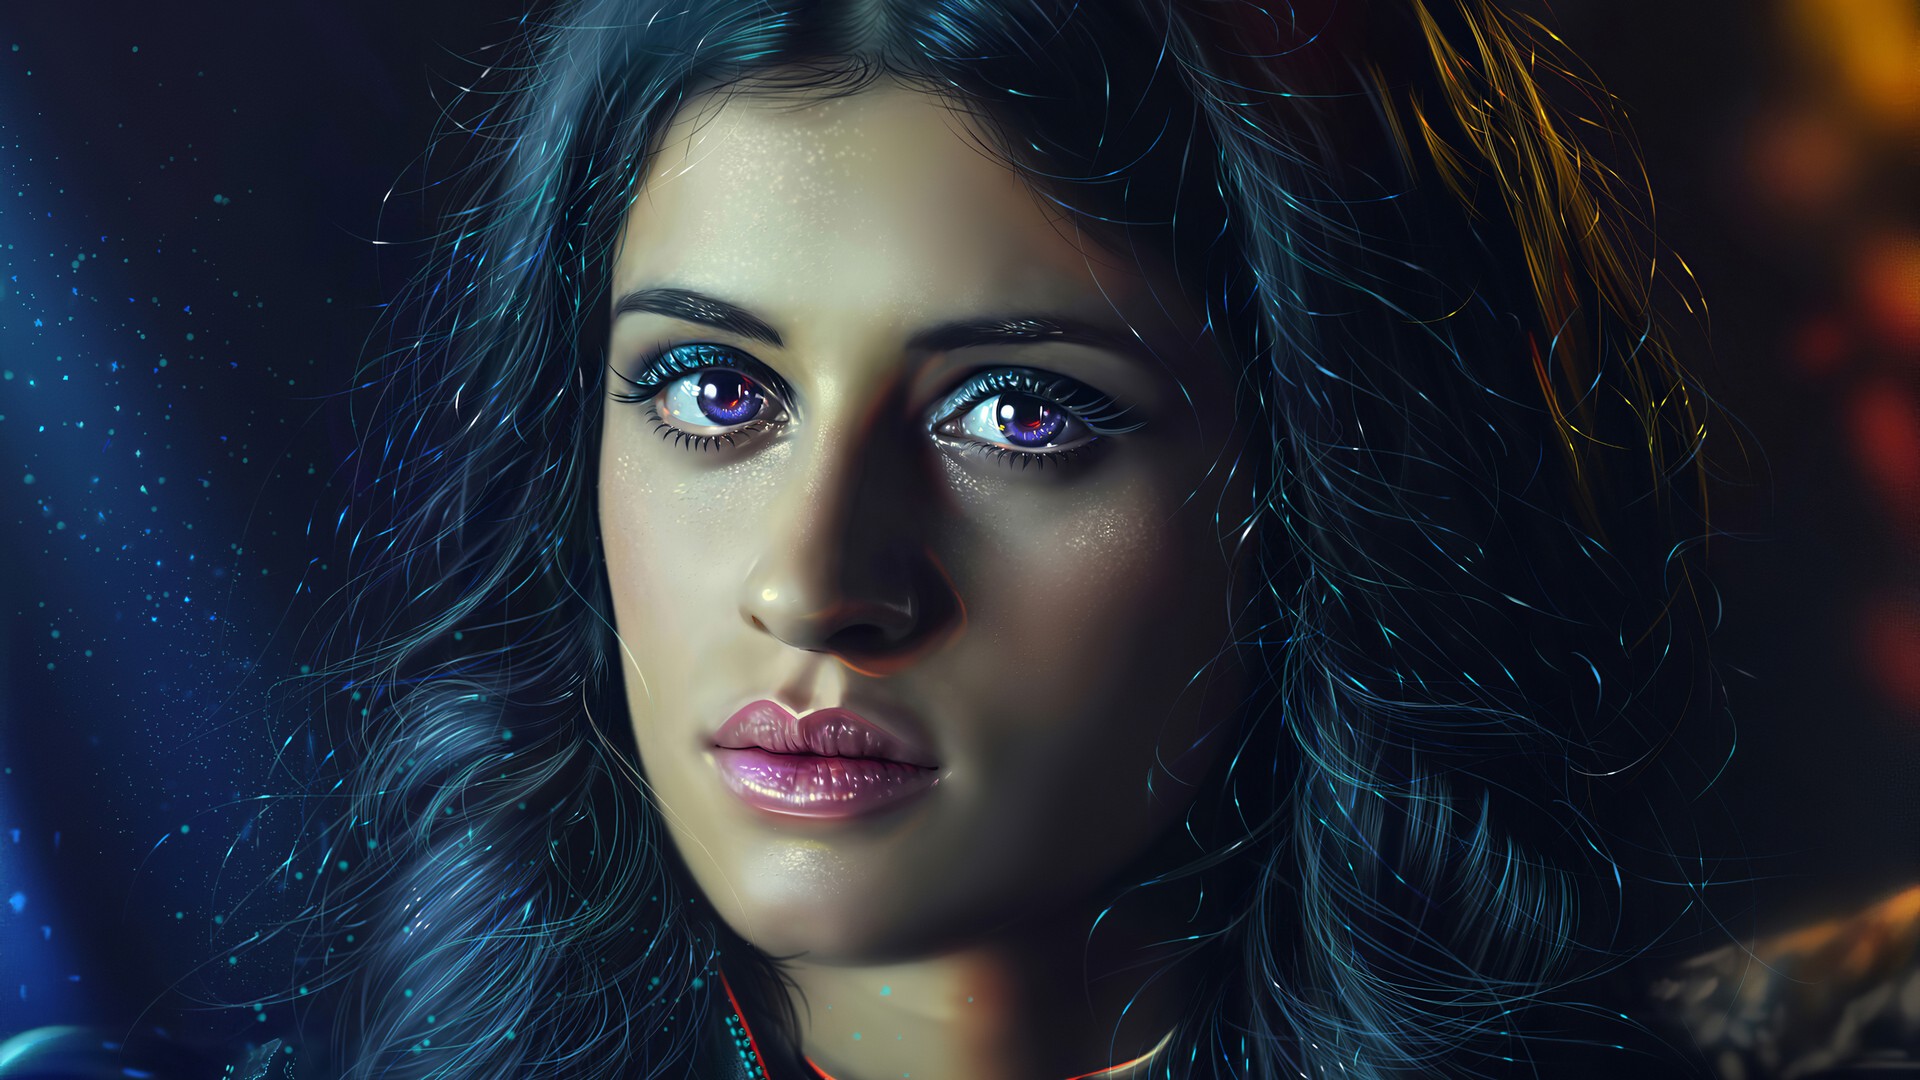 Anya Chalotra Yennefer The Witcher Wallpaper with high-resolution 1920x1080 pixel. You can use this wallpaper for your Windows and Mac OS computers as well as your Android and iPhone smartphones